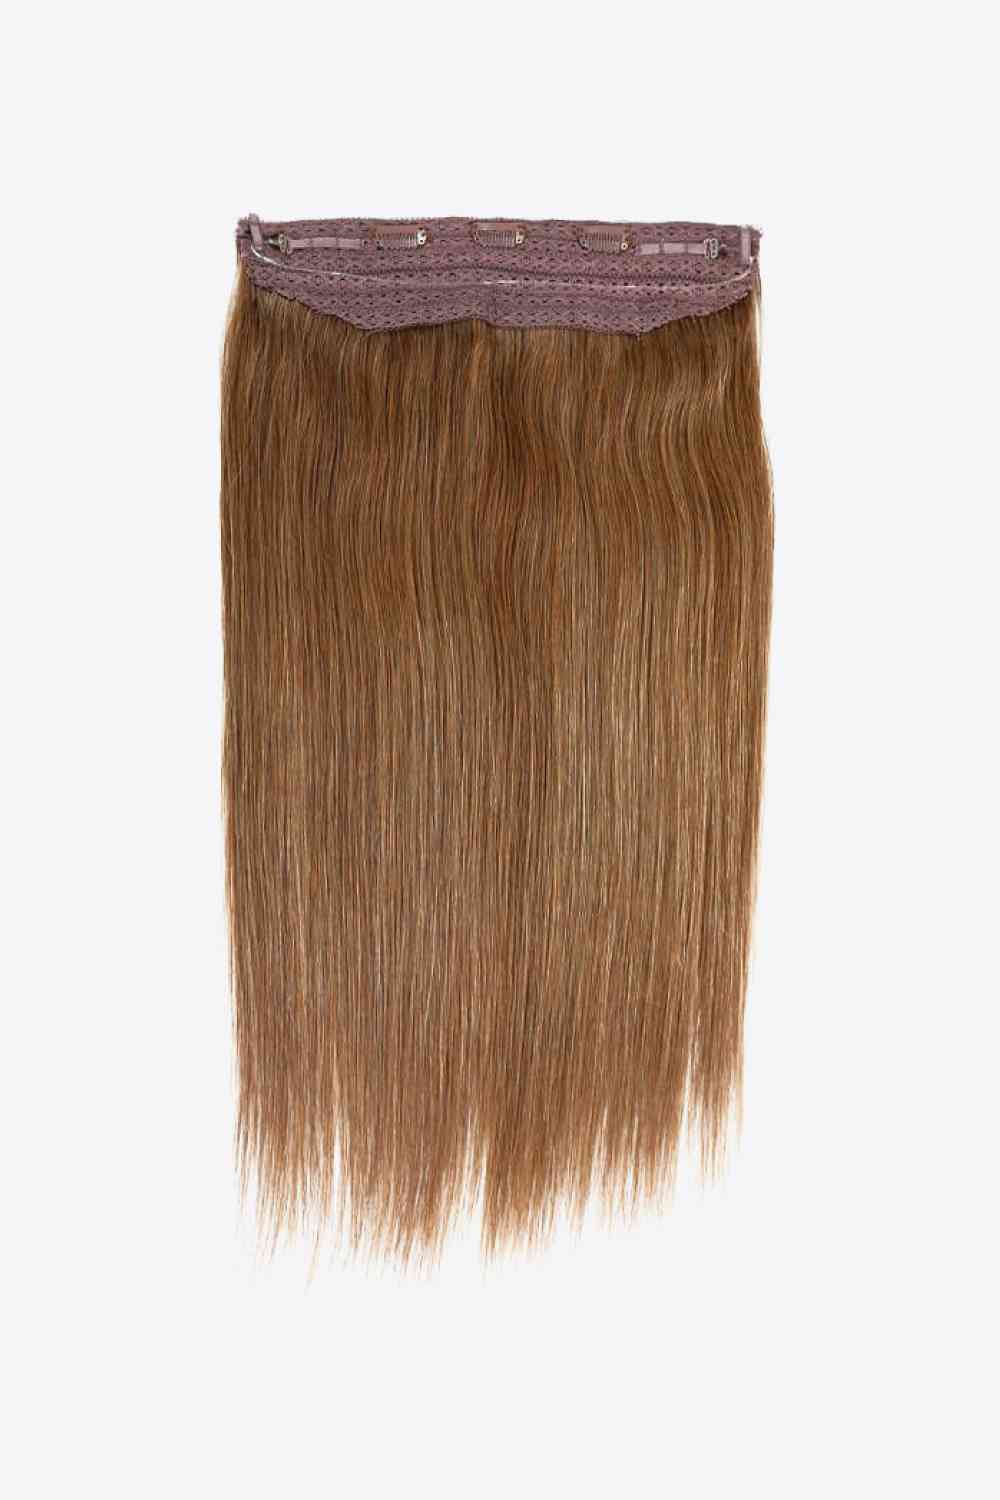 22" 100g Fully Handmade Straight Indian Human Halo Hair Brown One Size 